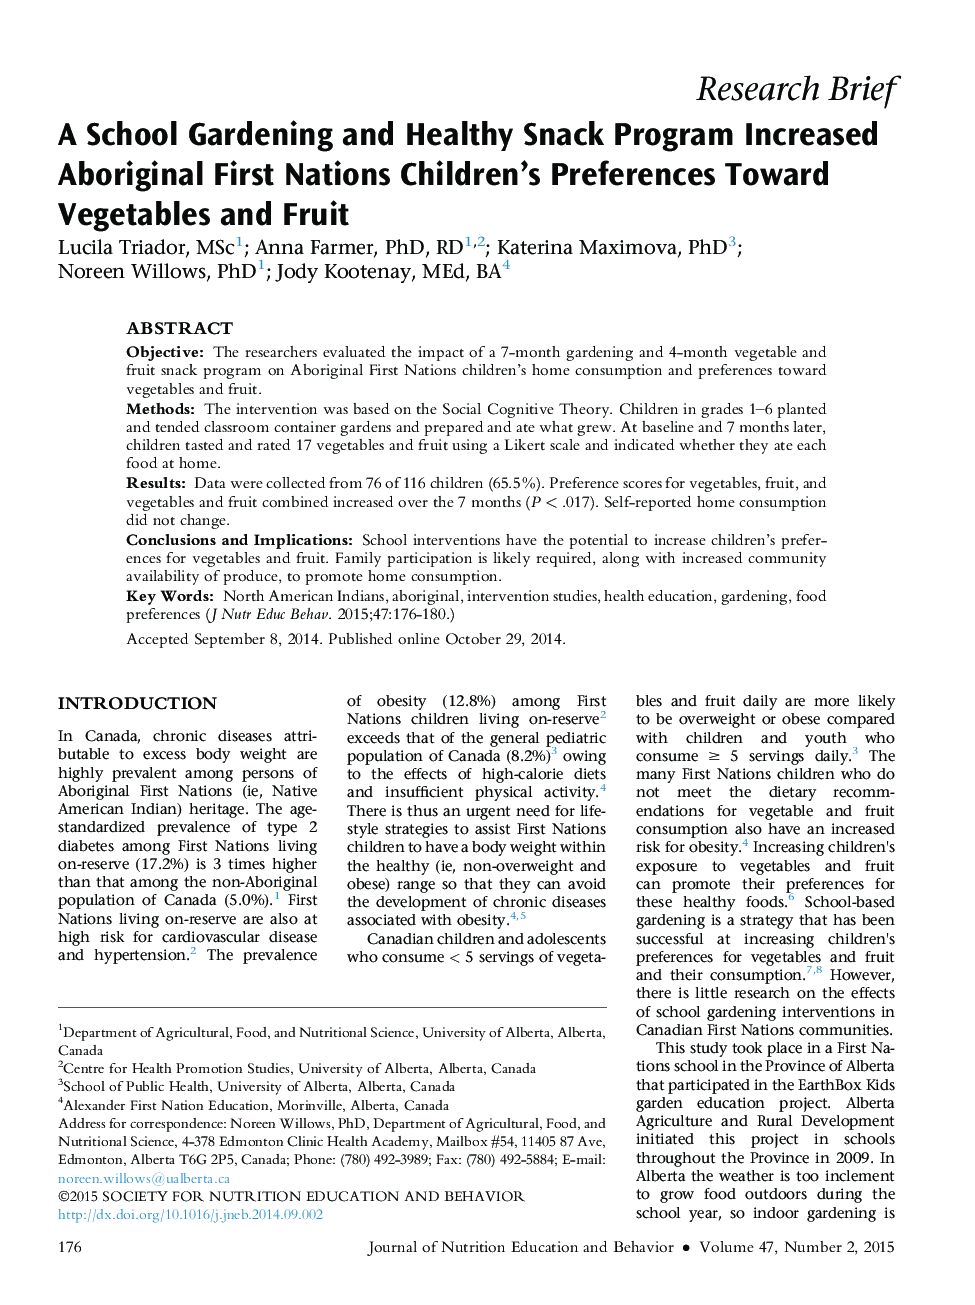 A School Gardening and Healthy Snack Program Increased Aboriginal First Nations Children's Preferences Toward Vegetables and Fruit